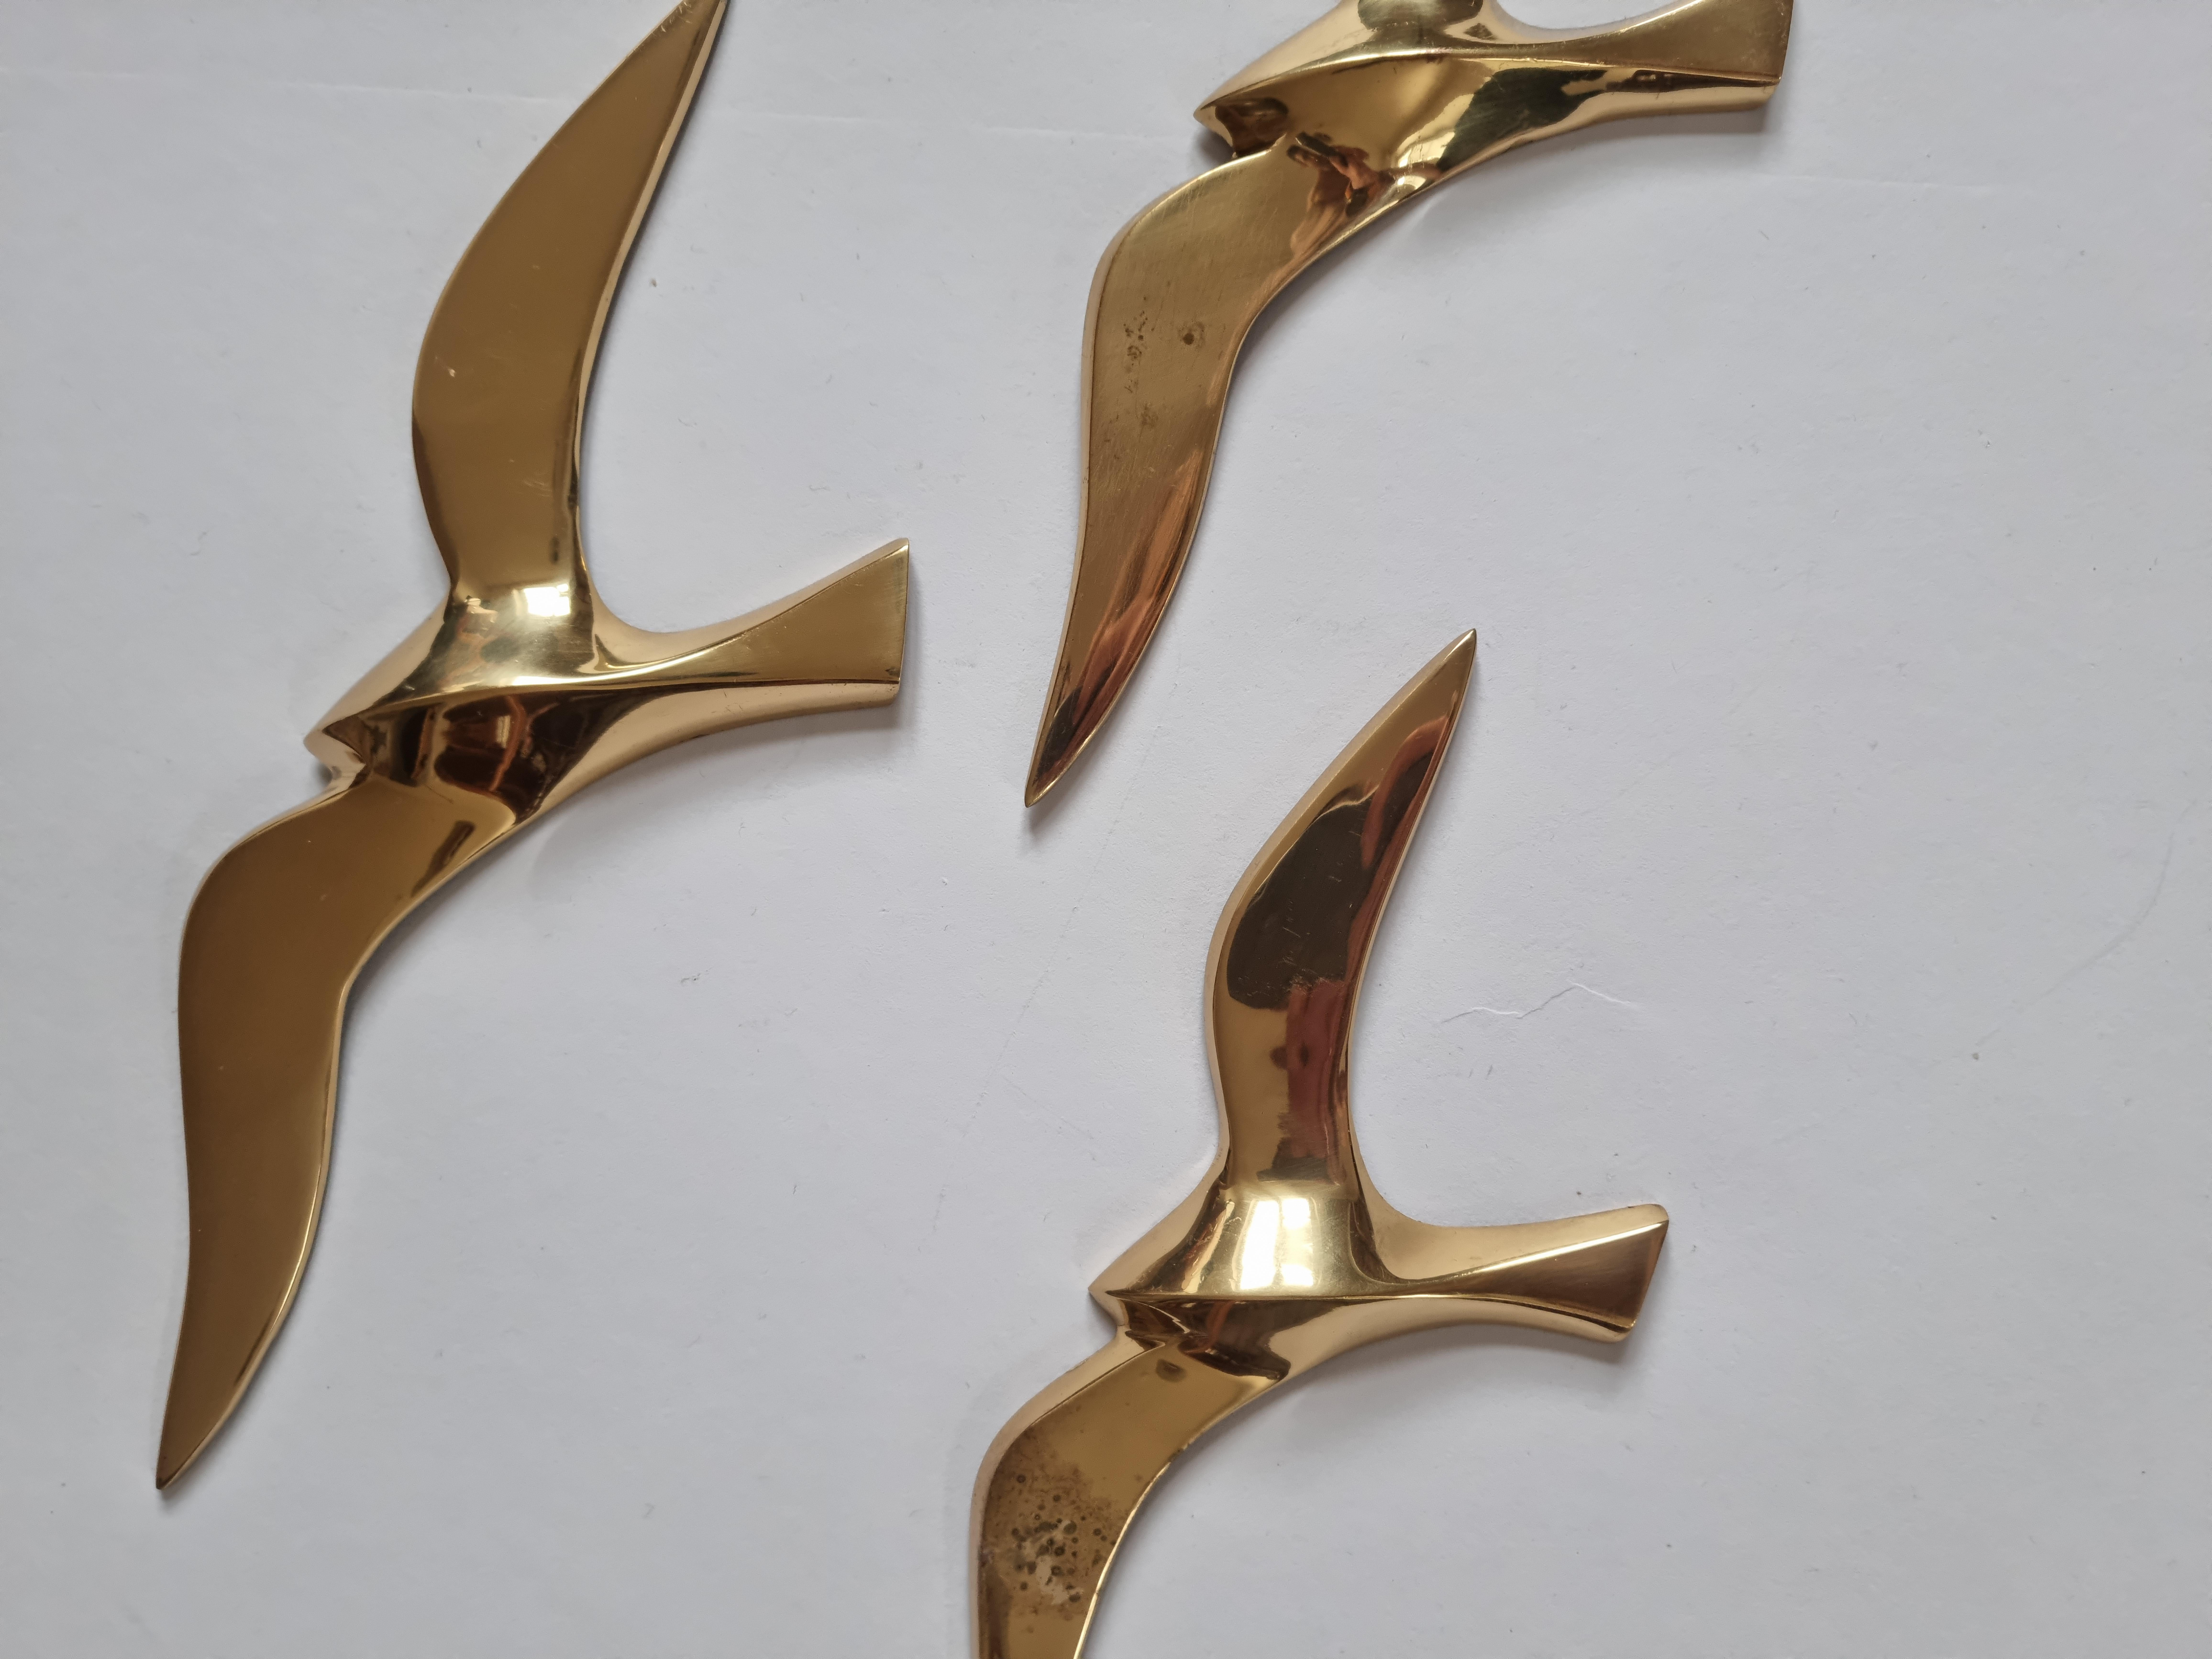 Set of Three Wall Brass Decor Sculptures of Seagulls, Austria, 1960s For Sale 4